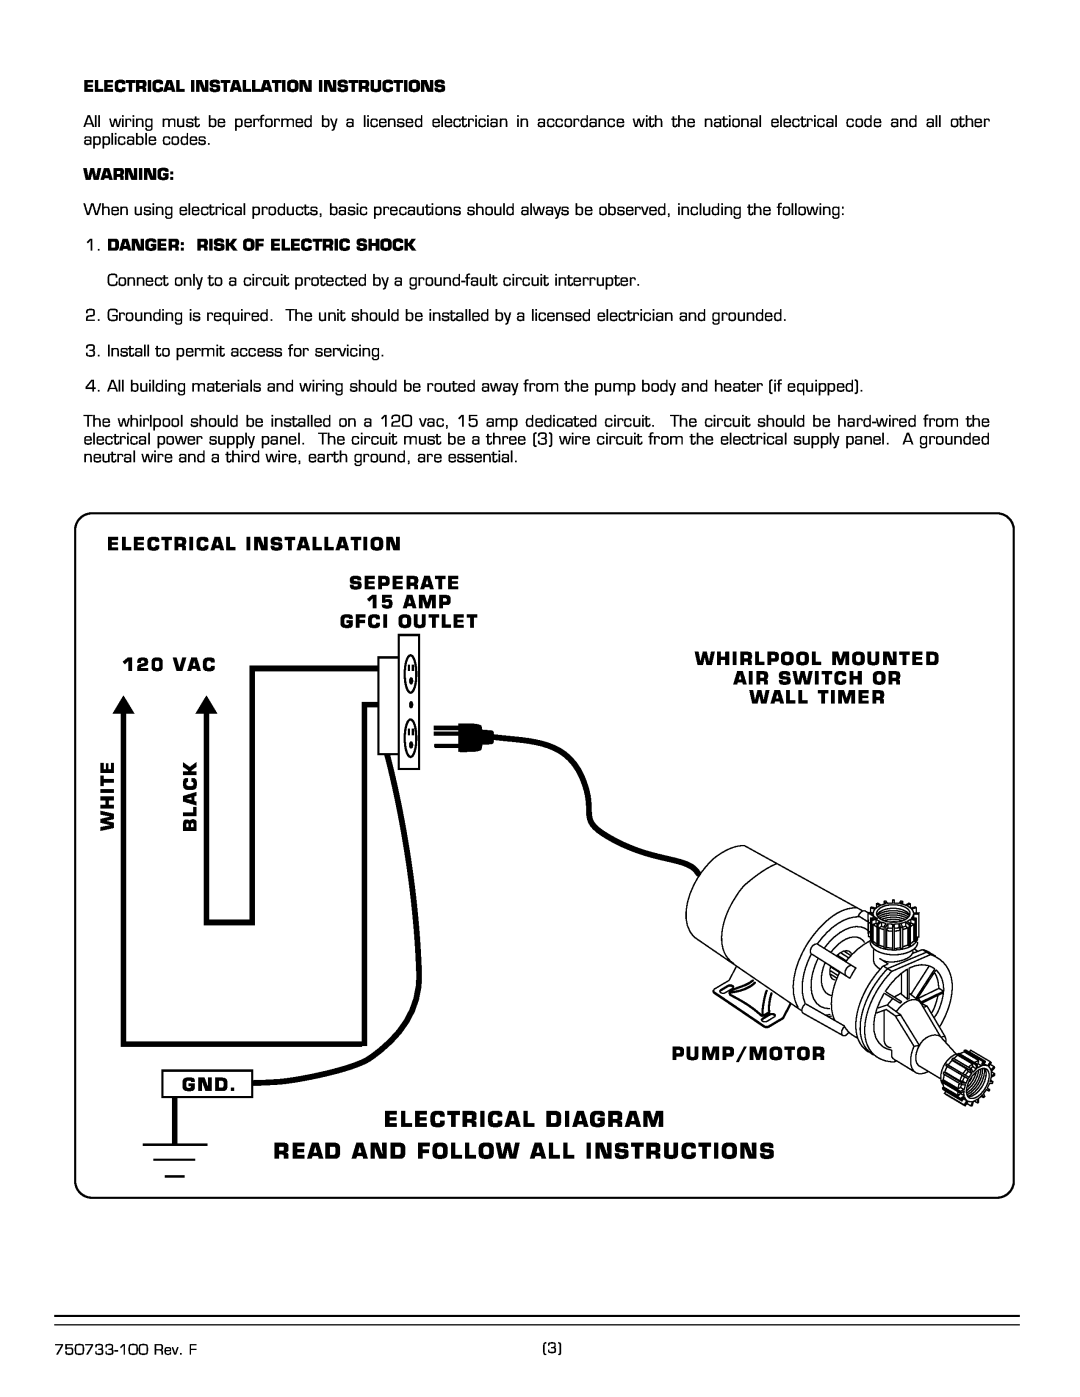 American Standard 2645 Series Electrical Diagram Read And Follow All Instructions, 120 VAC, White, Black 